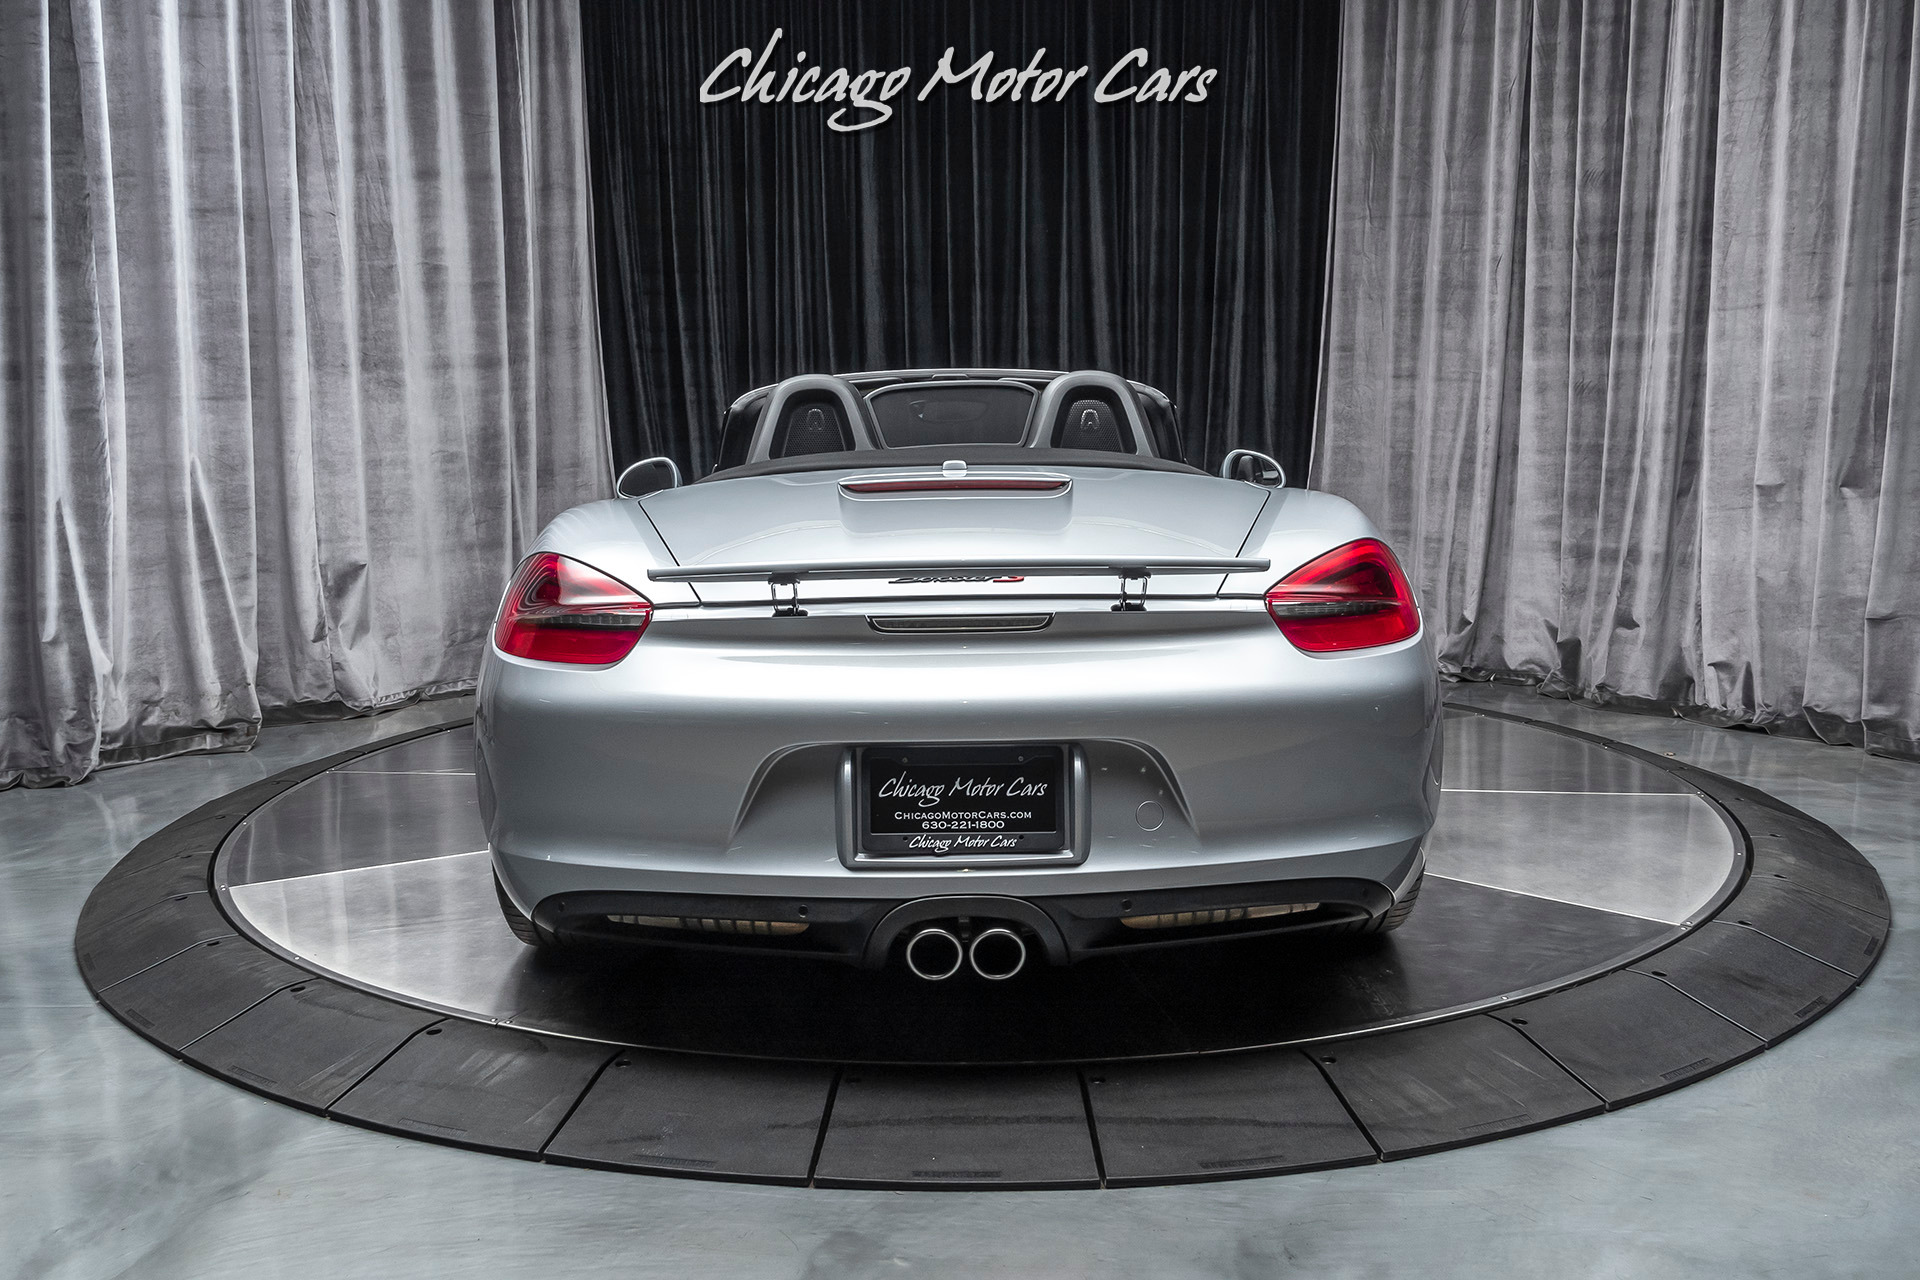 Used-2014-Porsche-Boxster-S-Convertible-Only-4K-Miles-Original-MSRP-81625